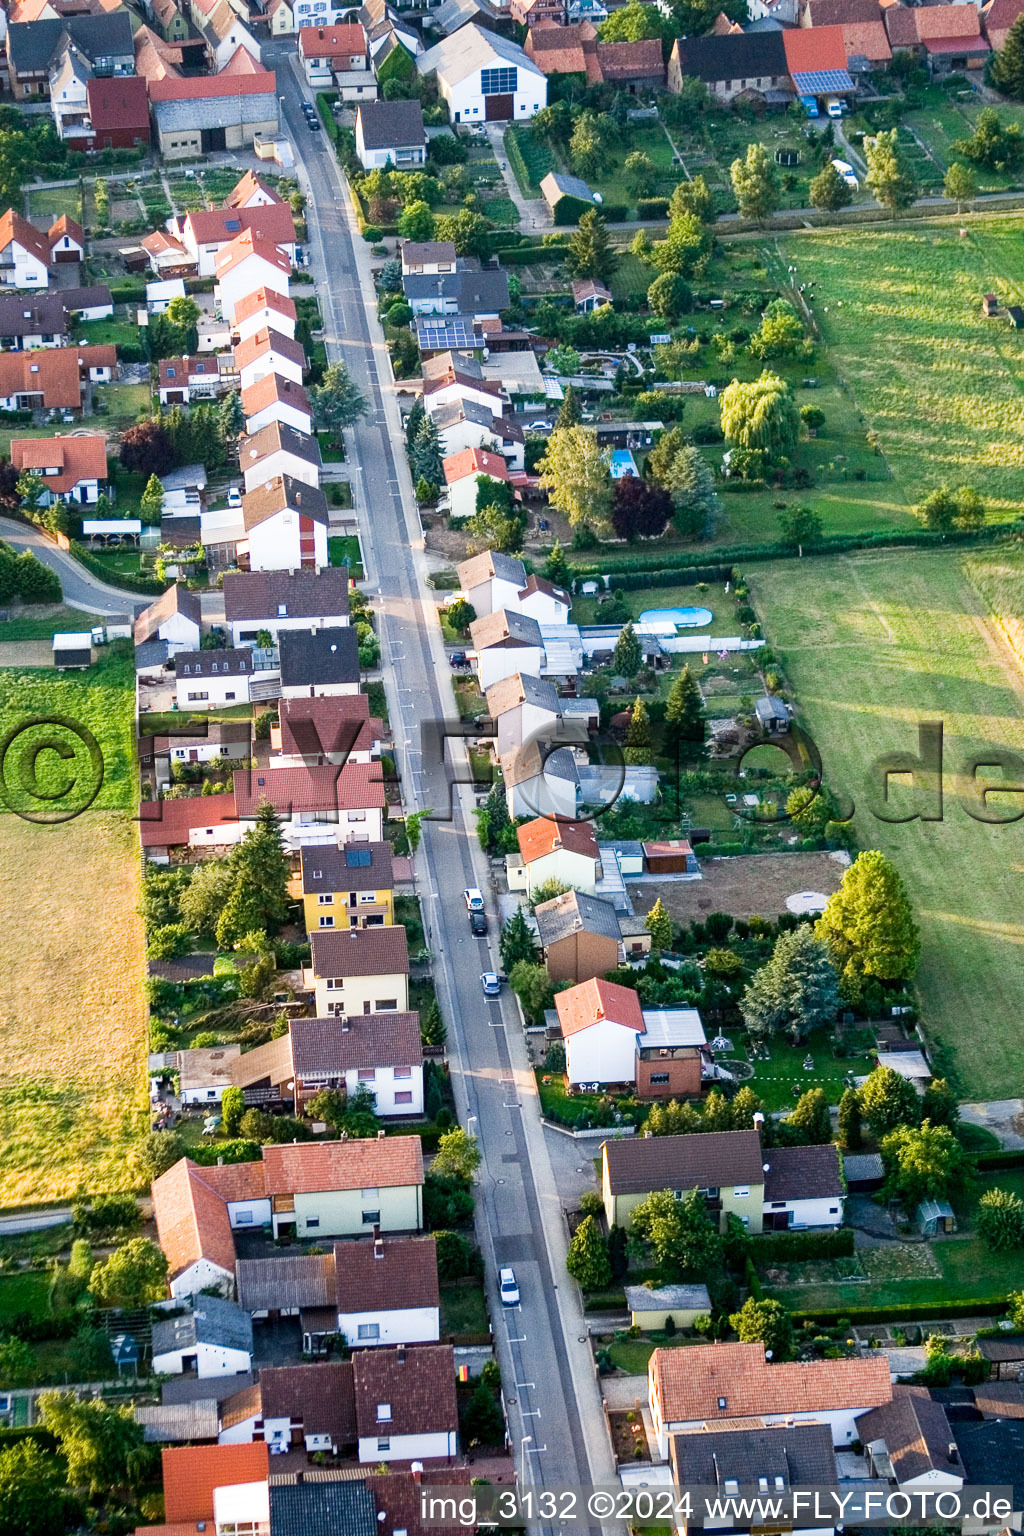 Aerial view of Wattstr in Freckenfeld in the state Rhineland-Palatinate, Germany